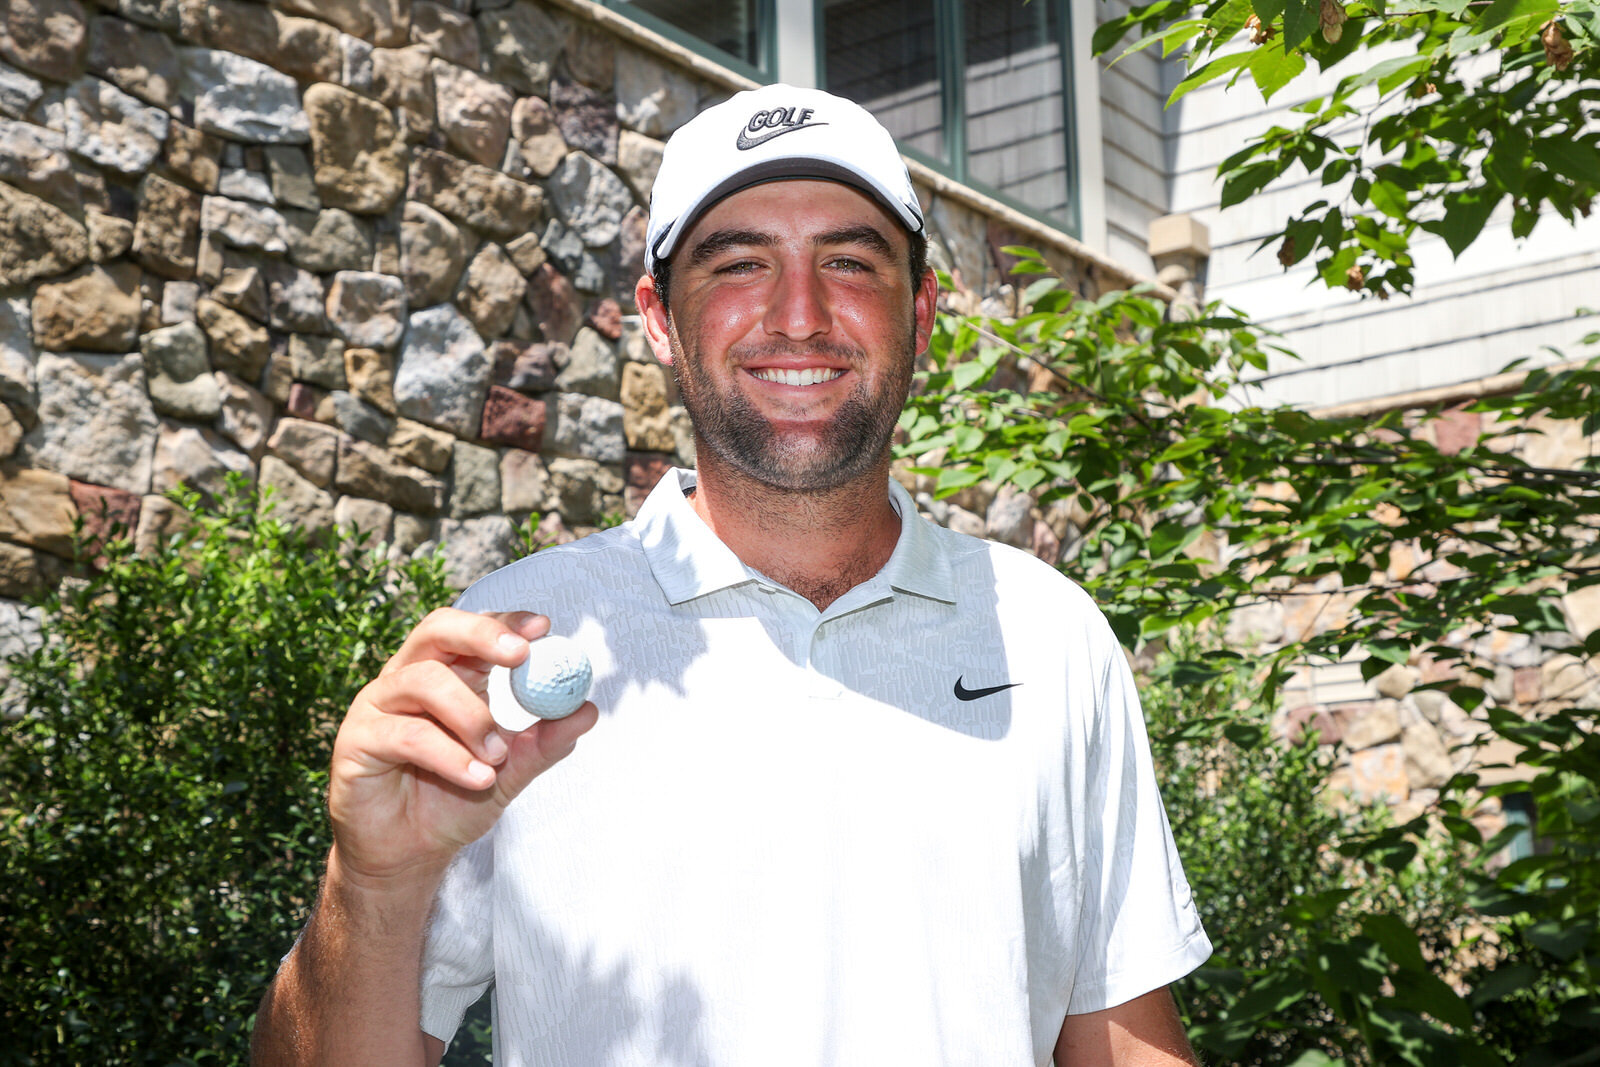  NORTON, MASSACHUSETTS - AUGUST 21: Scottie Scheffler of the United States holds up his golf ball in celebration after scoring a 59 during the second round of The Northern Trust at TPC Boston on August 21, 2020 in Norton, Massachusetts. (Photo by Rob